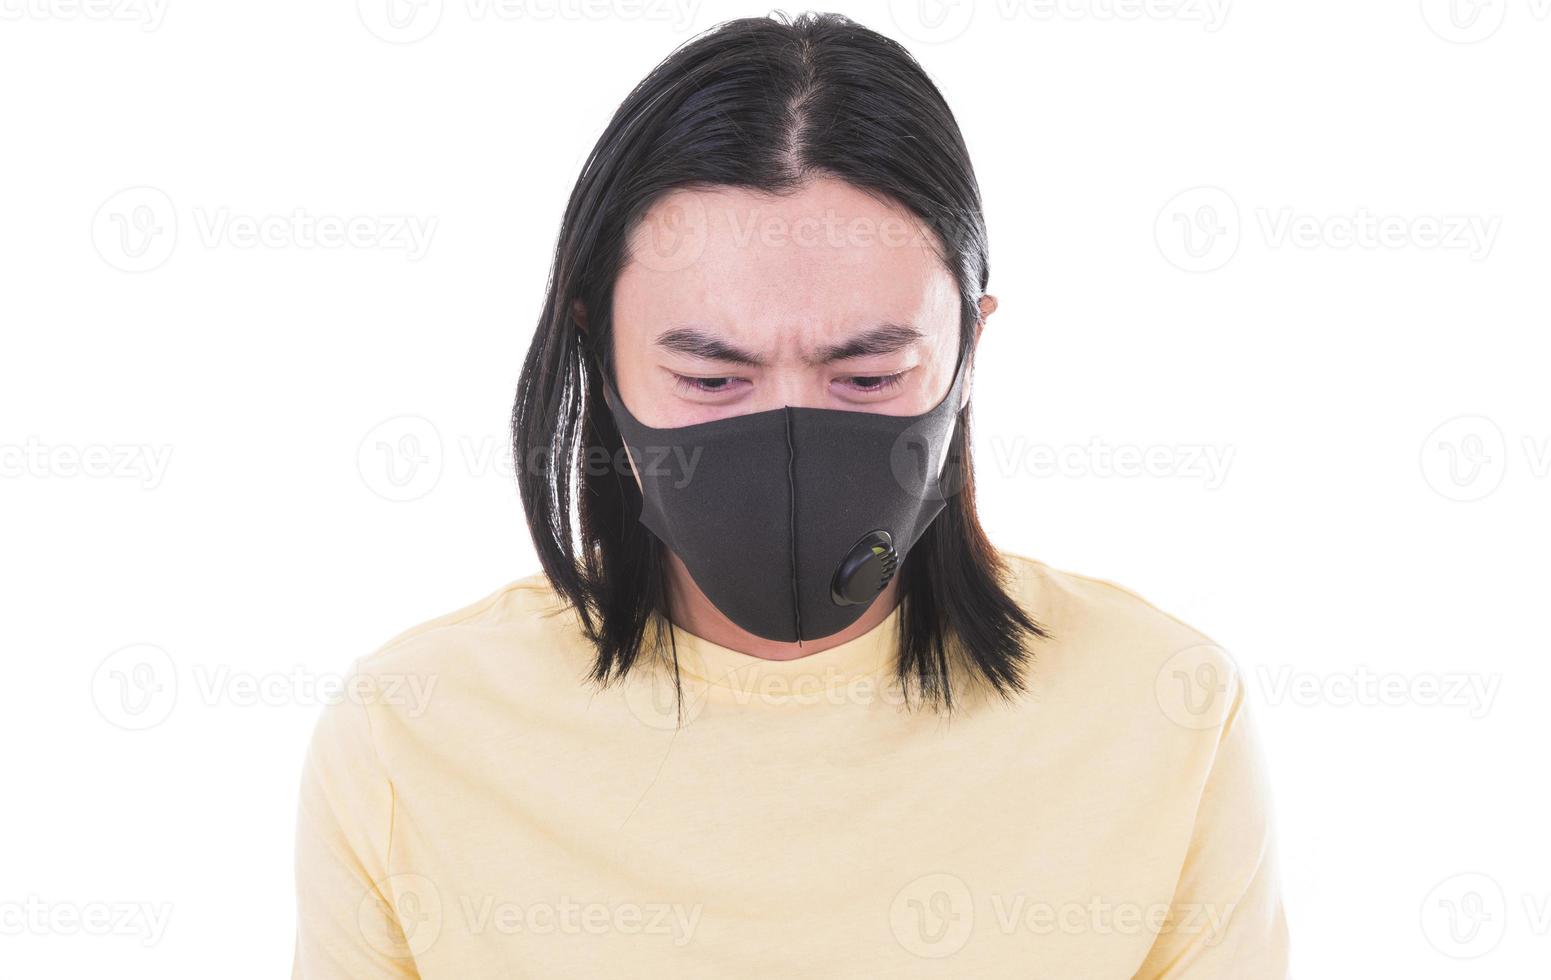 Asian man with breathing mask. Stop COVID Concept. young man wears a protective medical mask to prevent COVID-19 infection and showing the stop gesture photo